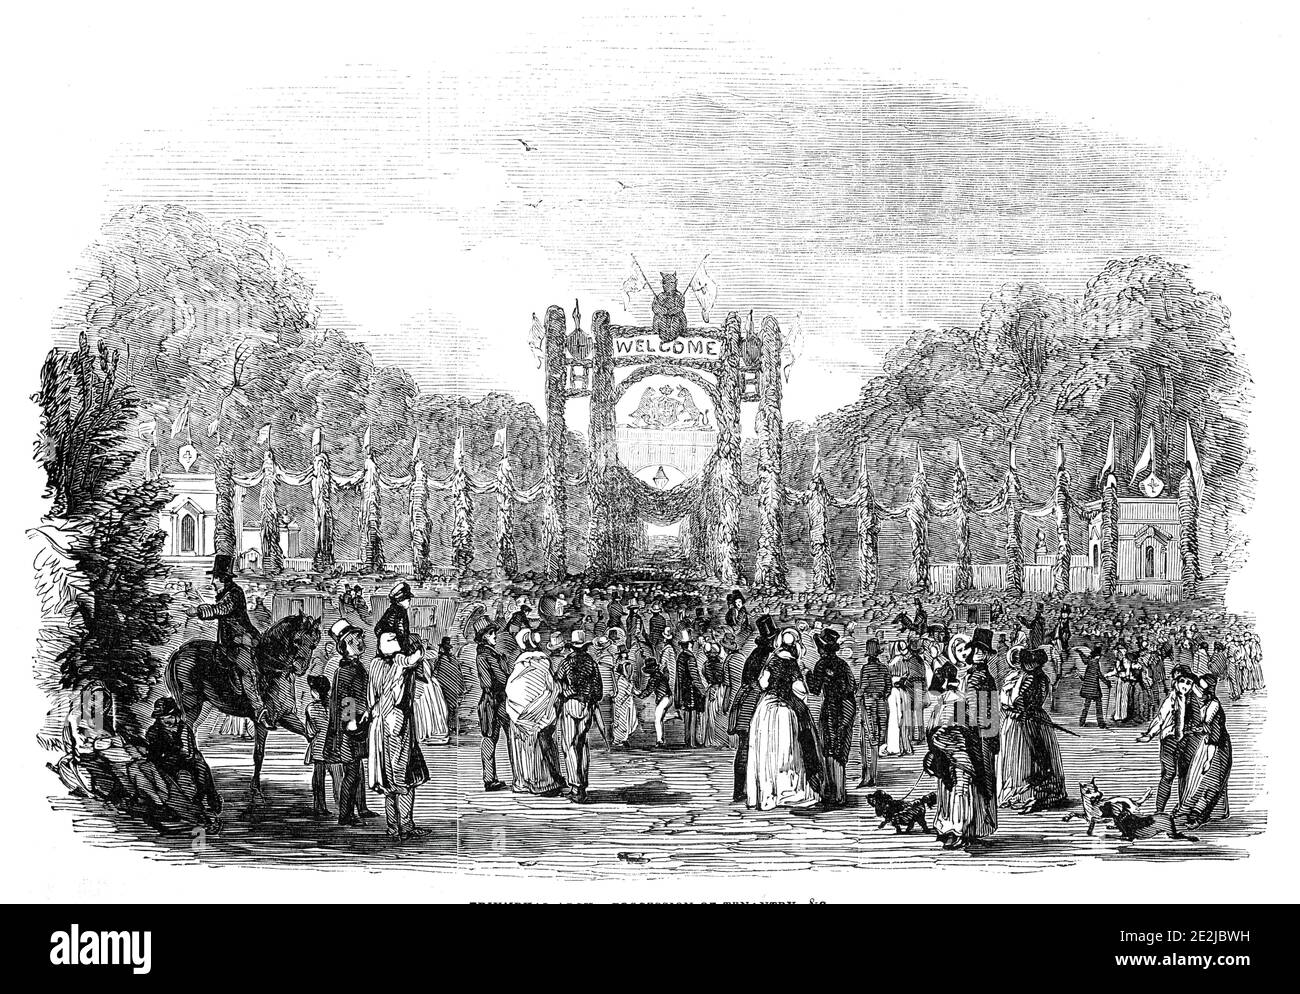 Grand festivities at Harewood House: triumphal arch - procession of tenantry etc, 1845. Celebrations at Harewood House near Leeds. 'The events which gave rise to the Festival were the Coming of Age, and Marriage, of Lord Viscount Lascelles, the eldest son of the present Earl of Harewood...In the centre was a large triumphal arch, formed of evergreens and flowers, in which were depicted the Harewood arms, with the word &quot;Welcome,&quot; in flowers...The arch was flanked with laurel columns, from the apex of each of which gaily floated a blue, white, or red silken flag. From the above arch a Stock Photo